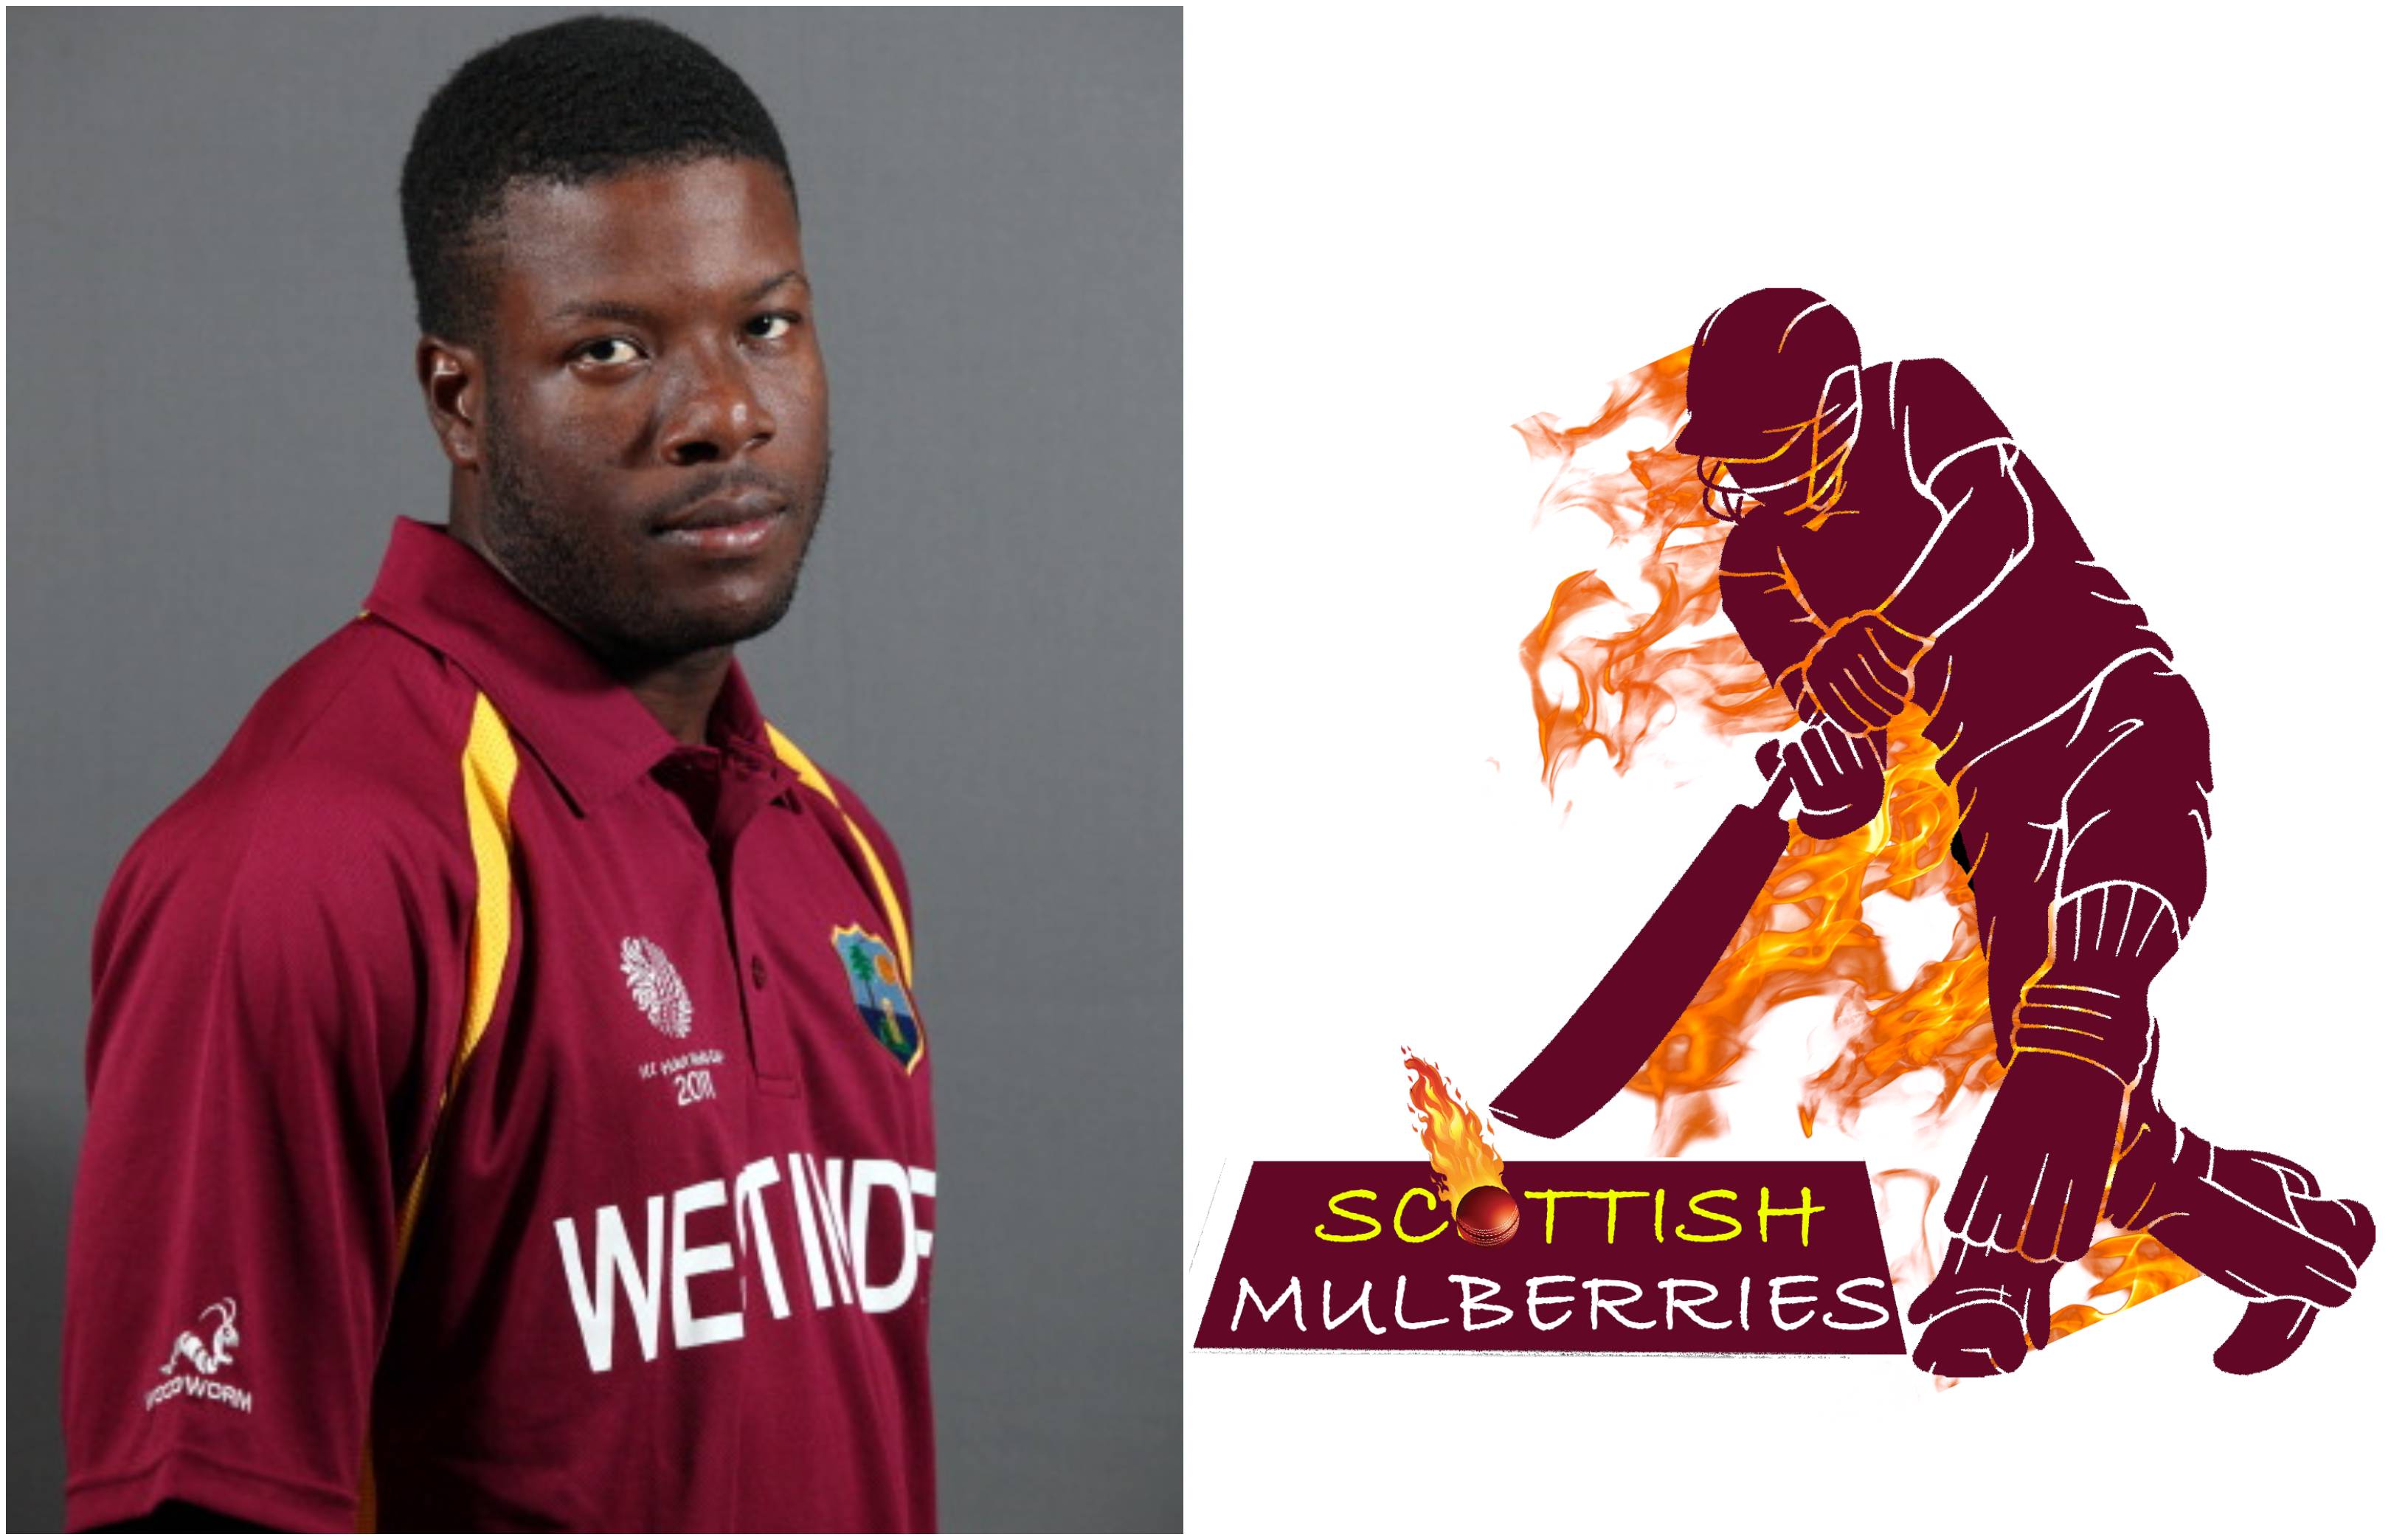 Kirk Edwards will captain Scottish Mulberries in the inaugural GPCL season